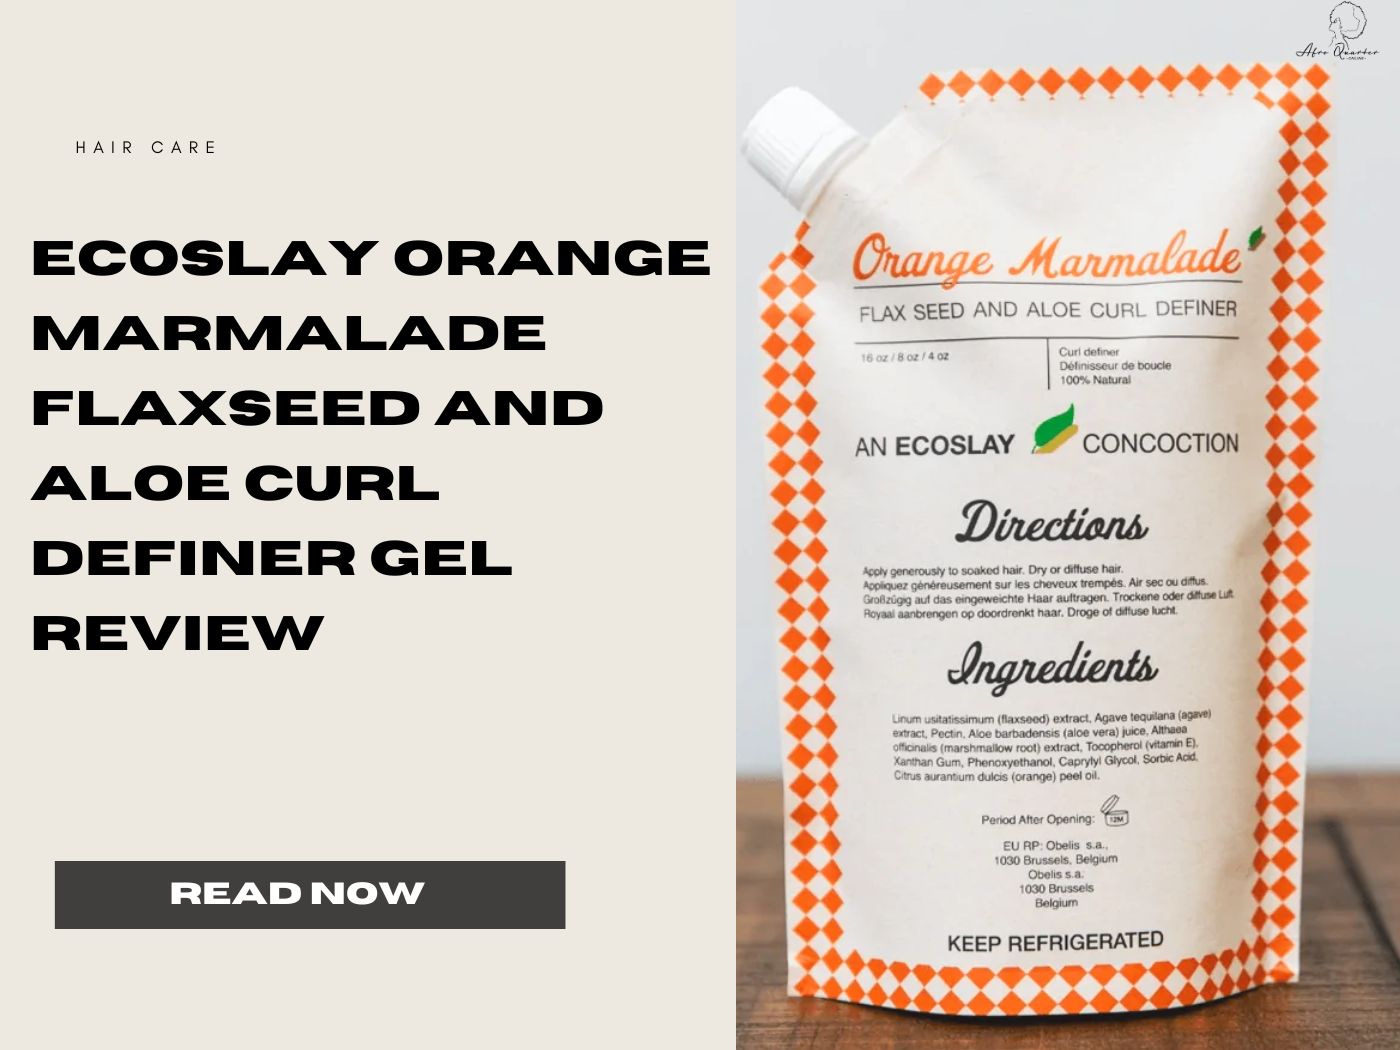 The Ecoslay Orange Marmalade Flaxseed and Aloe Curl Definer Gel  Review